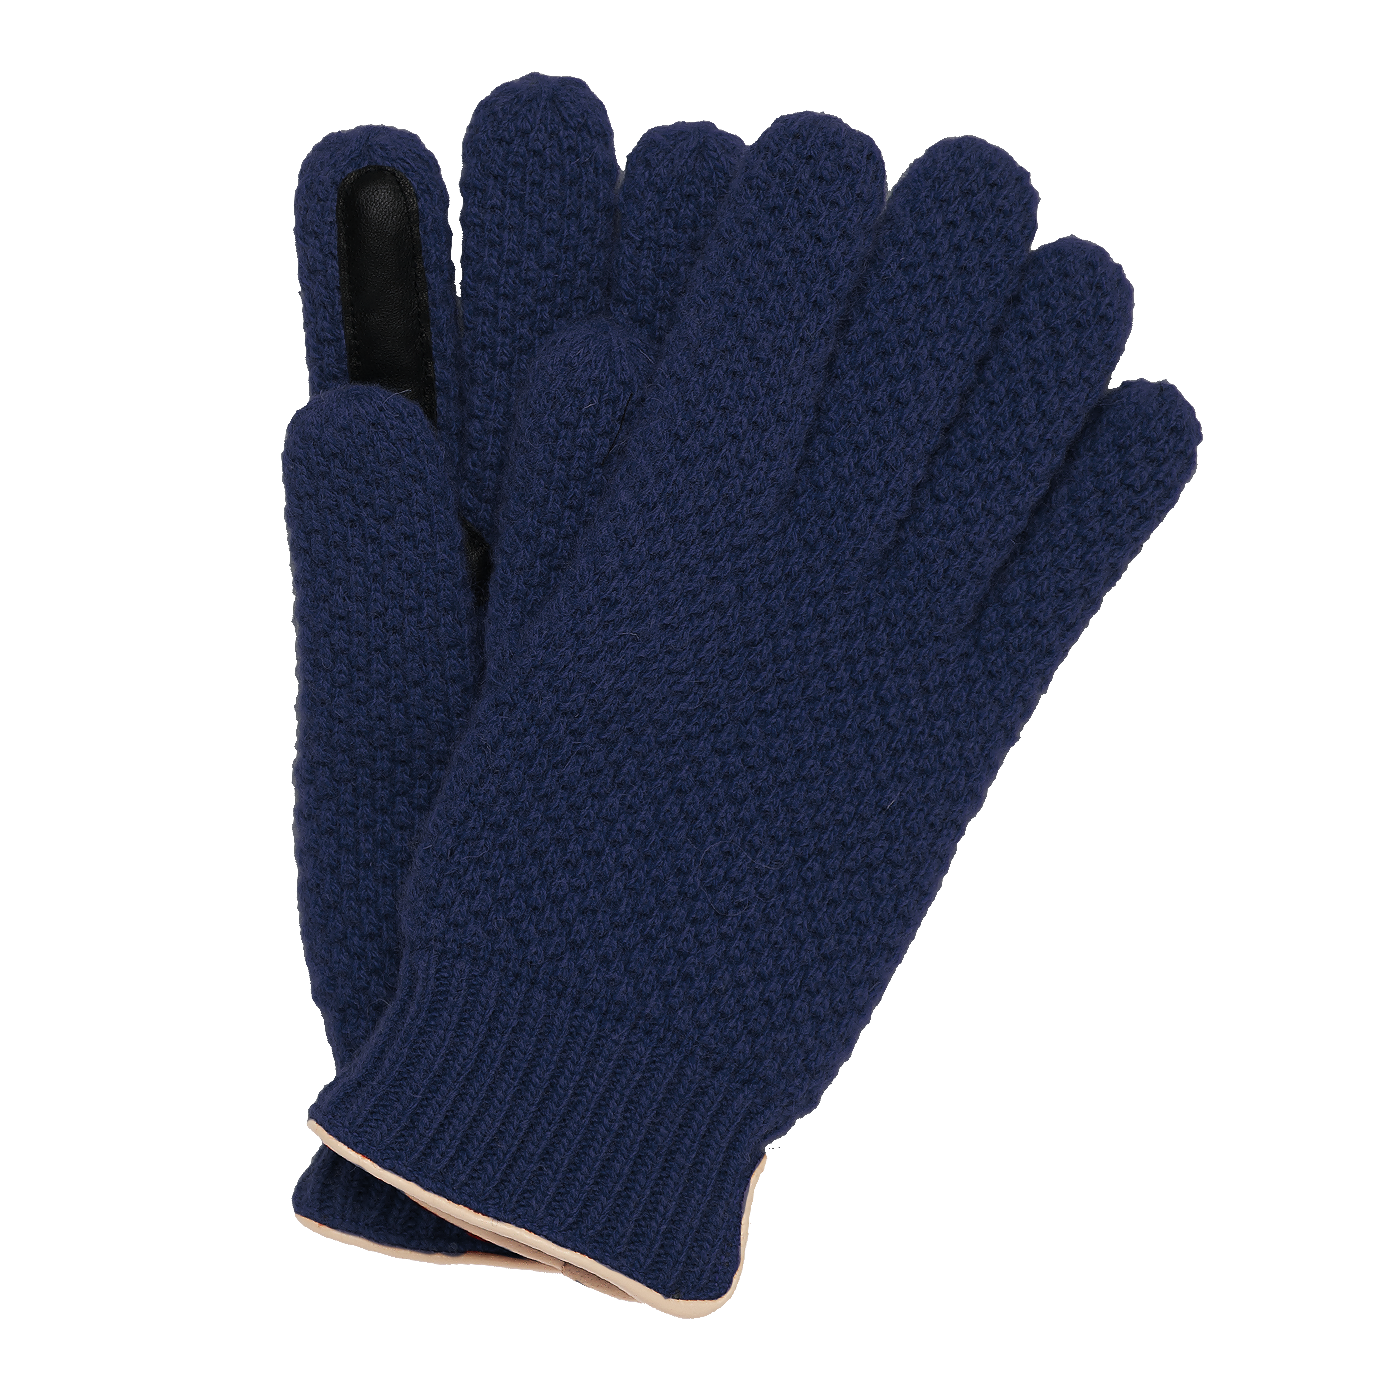 Knitted City Glove - Navy